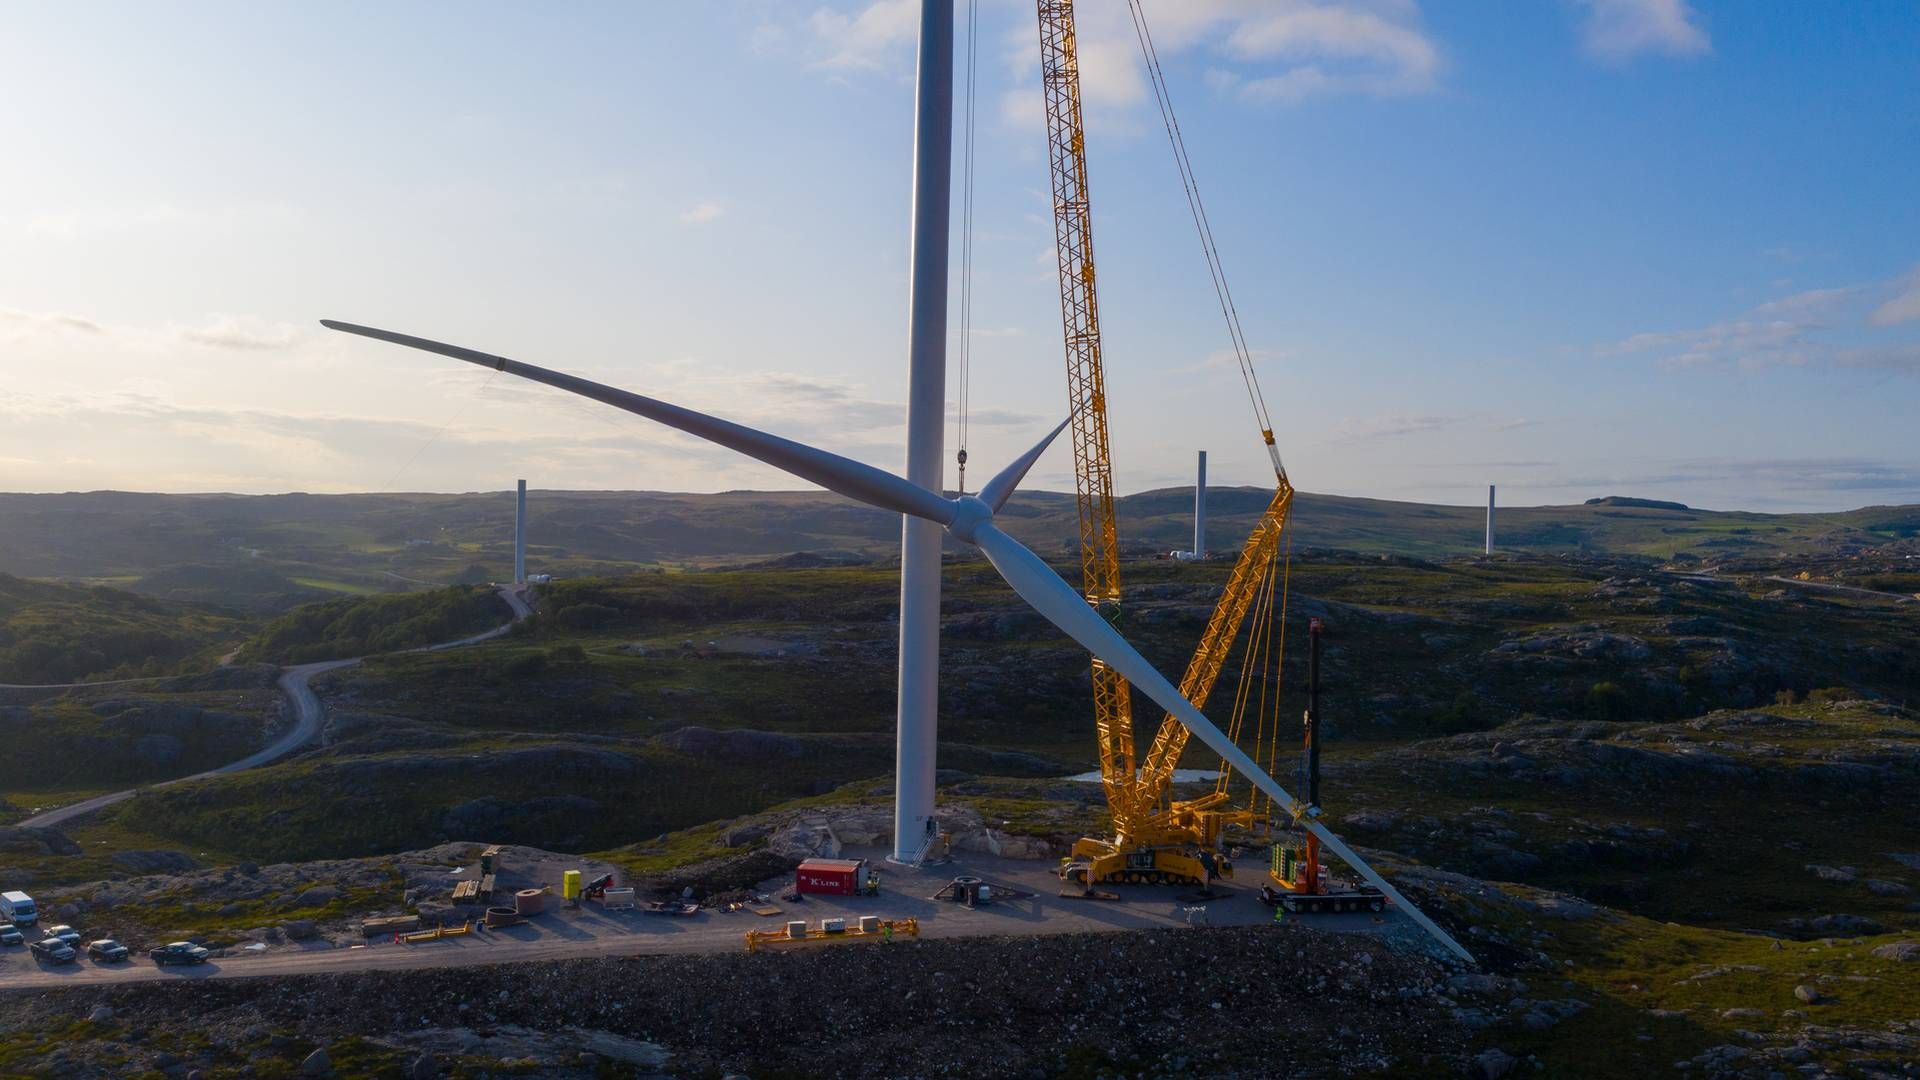 The Sødre Bjerkheim cluster of 294 MW was already heavily delayed prior to Covid-19. | Photo: Norsk Vind